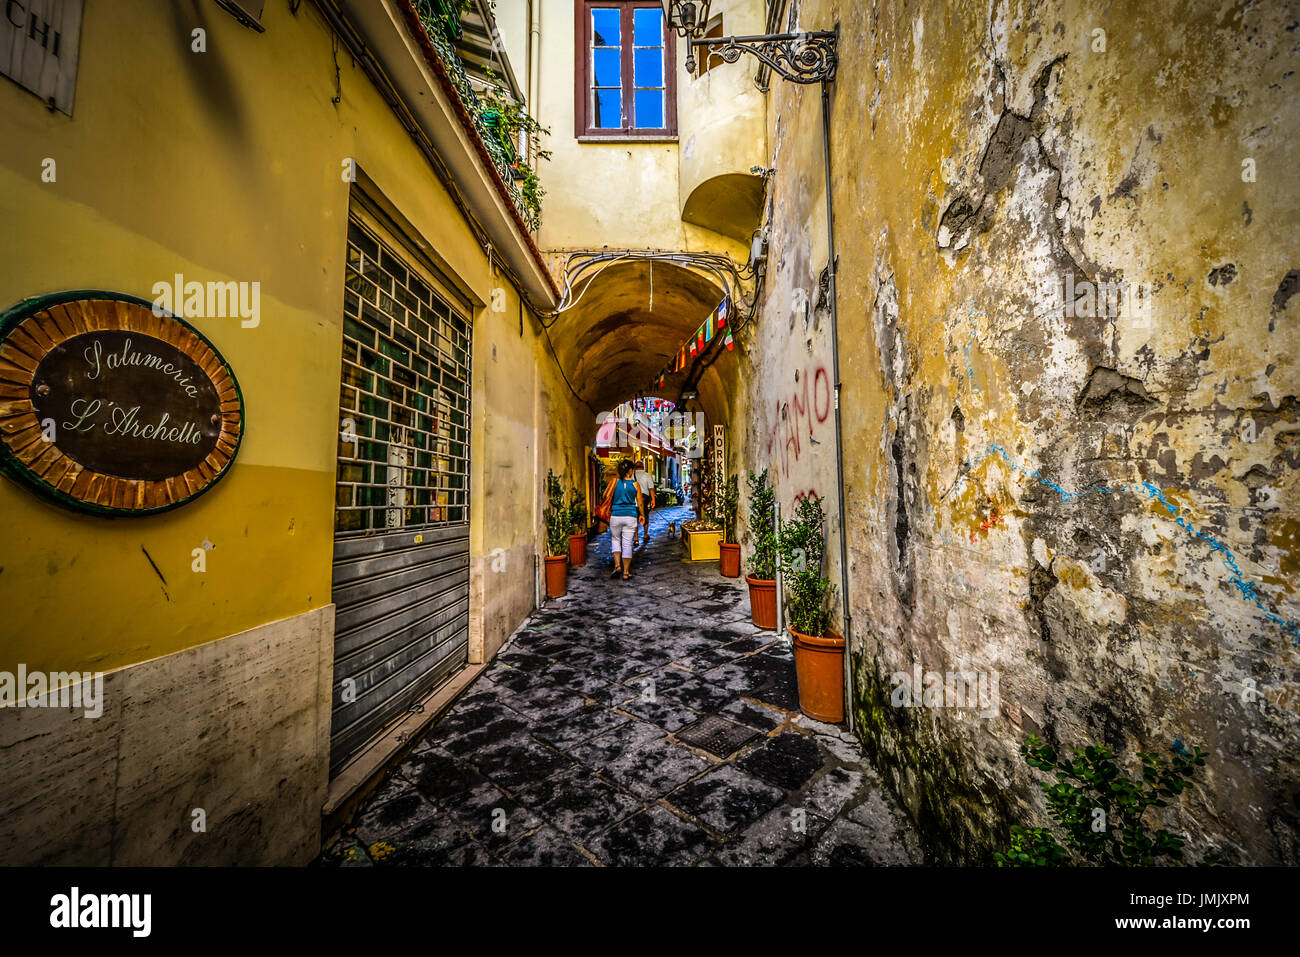 A woman traveling alone walks down a narrow path through a small tunnel in the Mediterranean city of Sorrento Italy Stock Photo